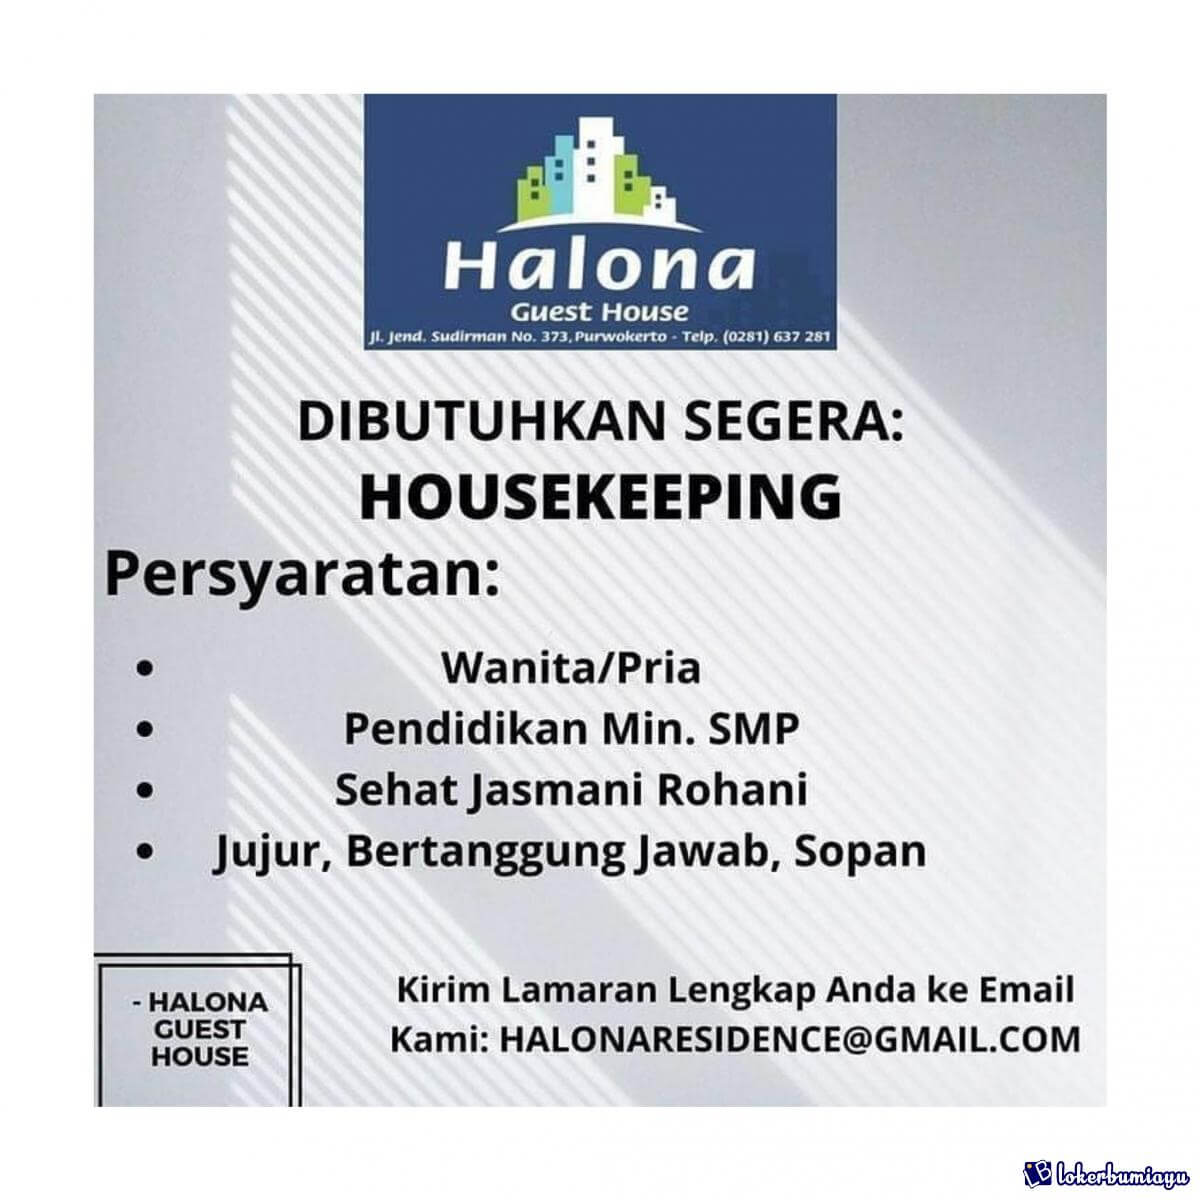 Halona Guest House Purwokerto